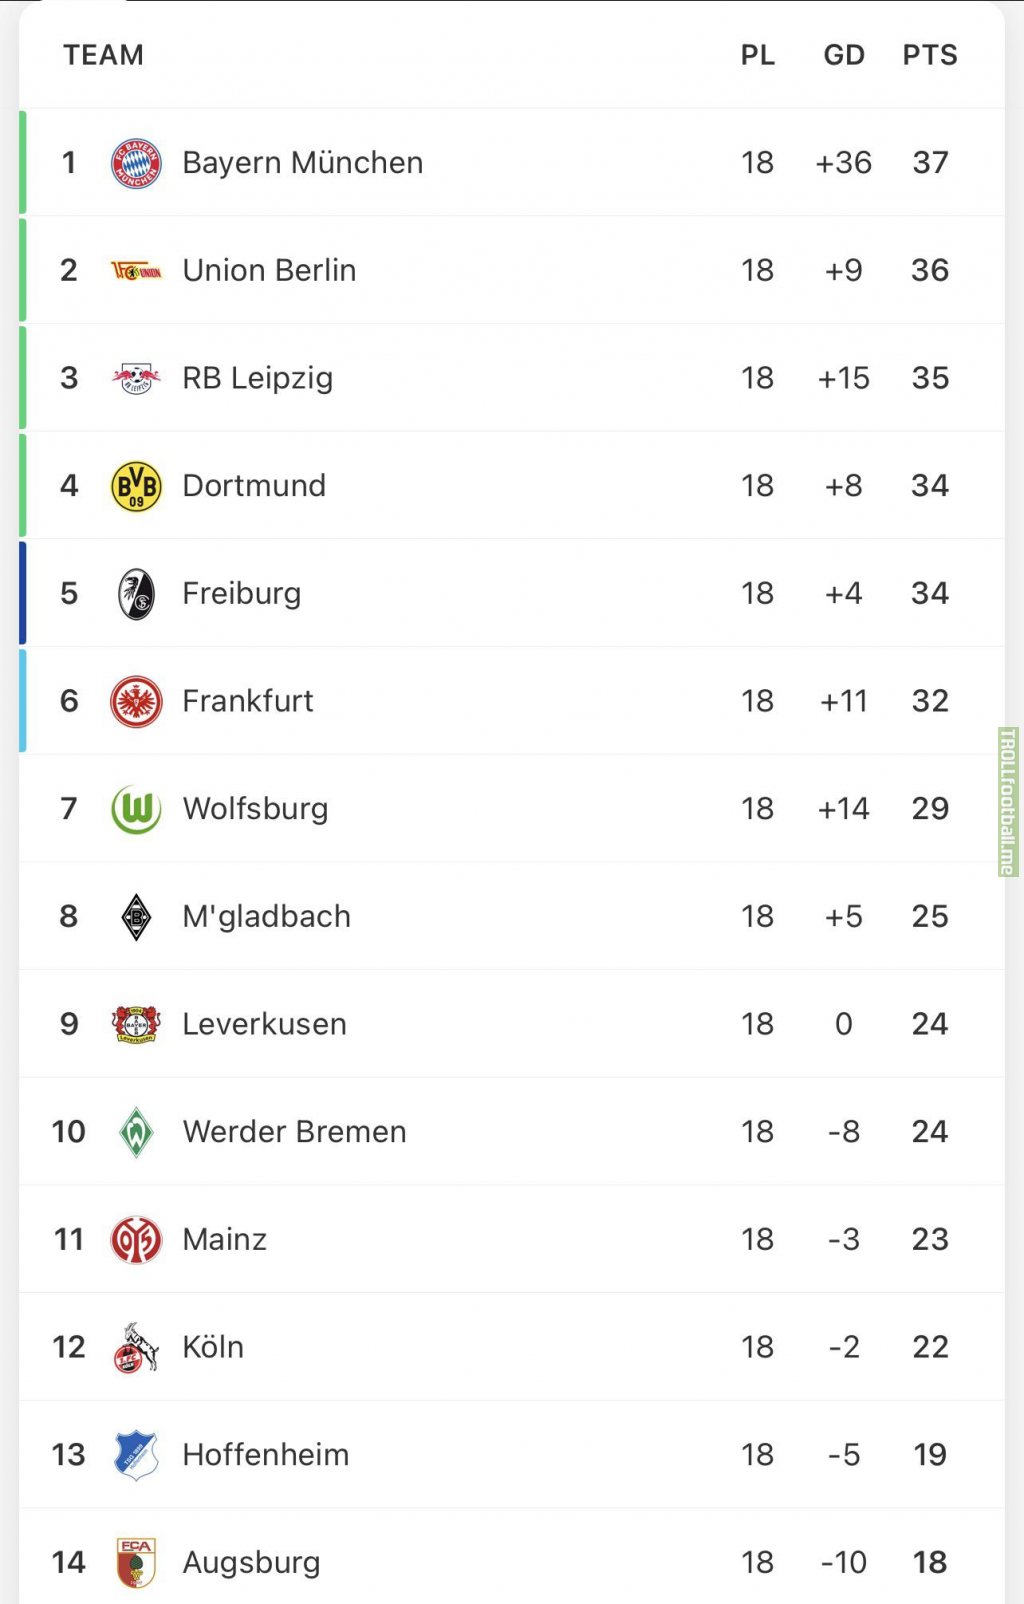 Bundesliga with the tightest title race among the top 5 leagues